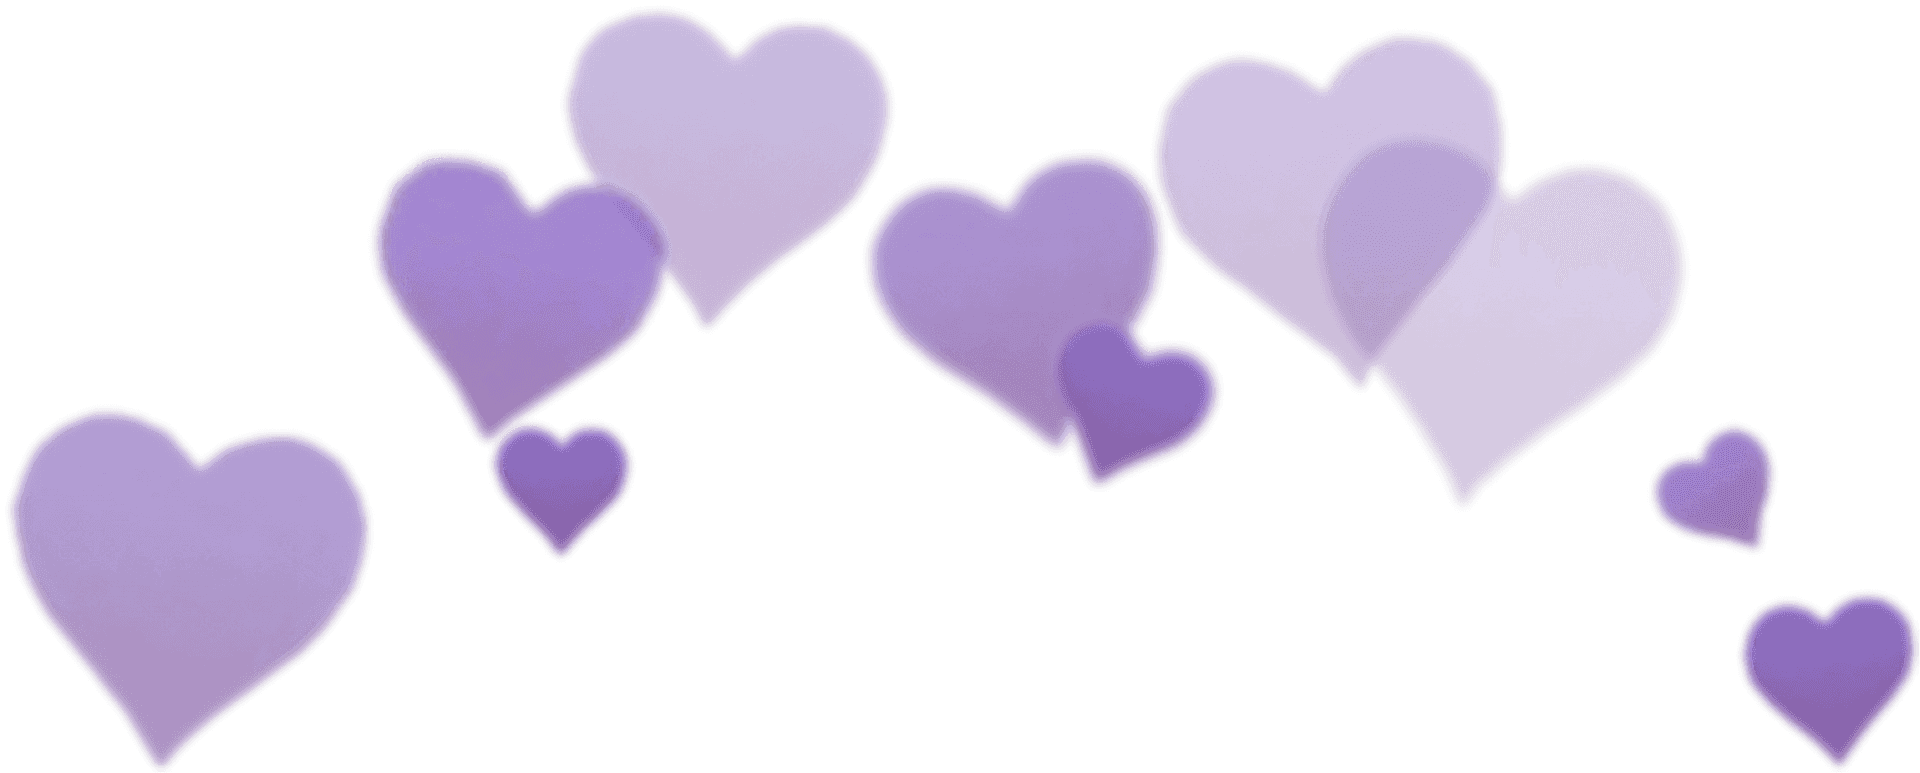 Purple Heart Filter Overlay PNG